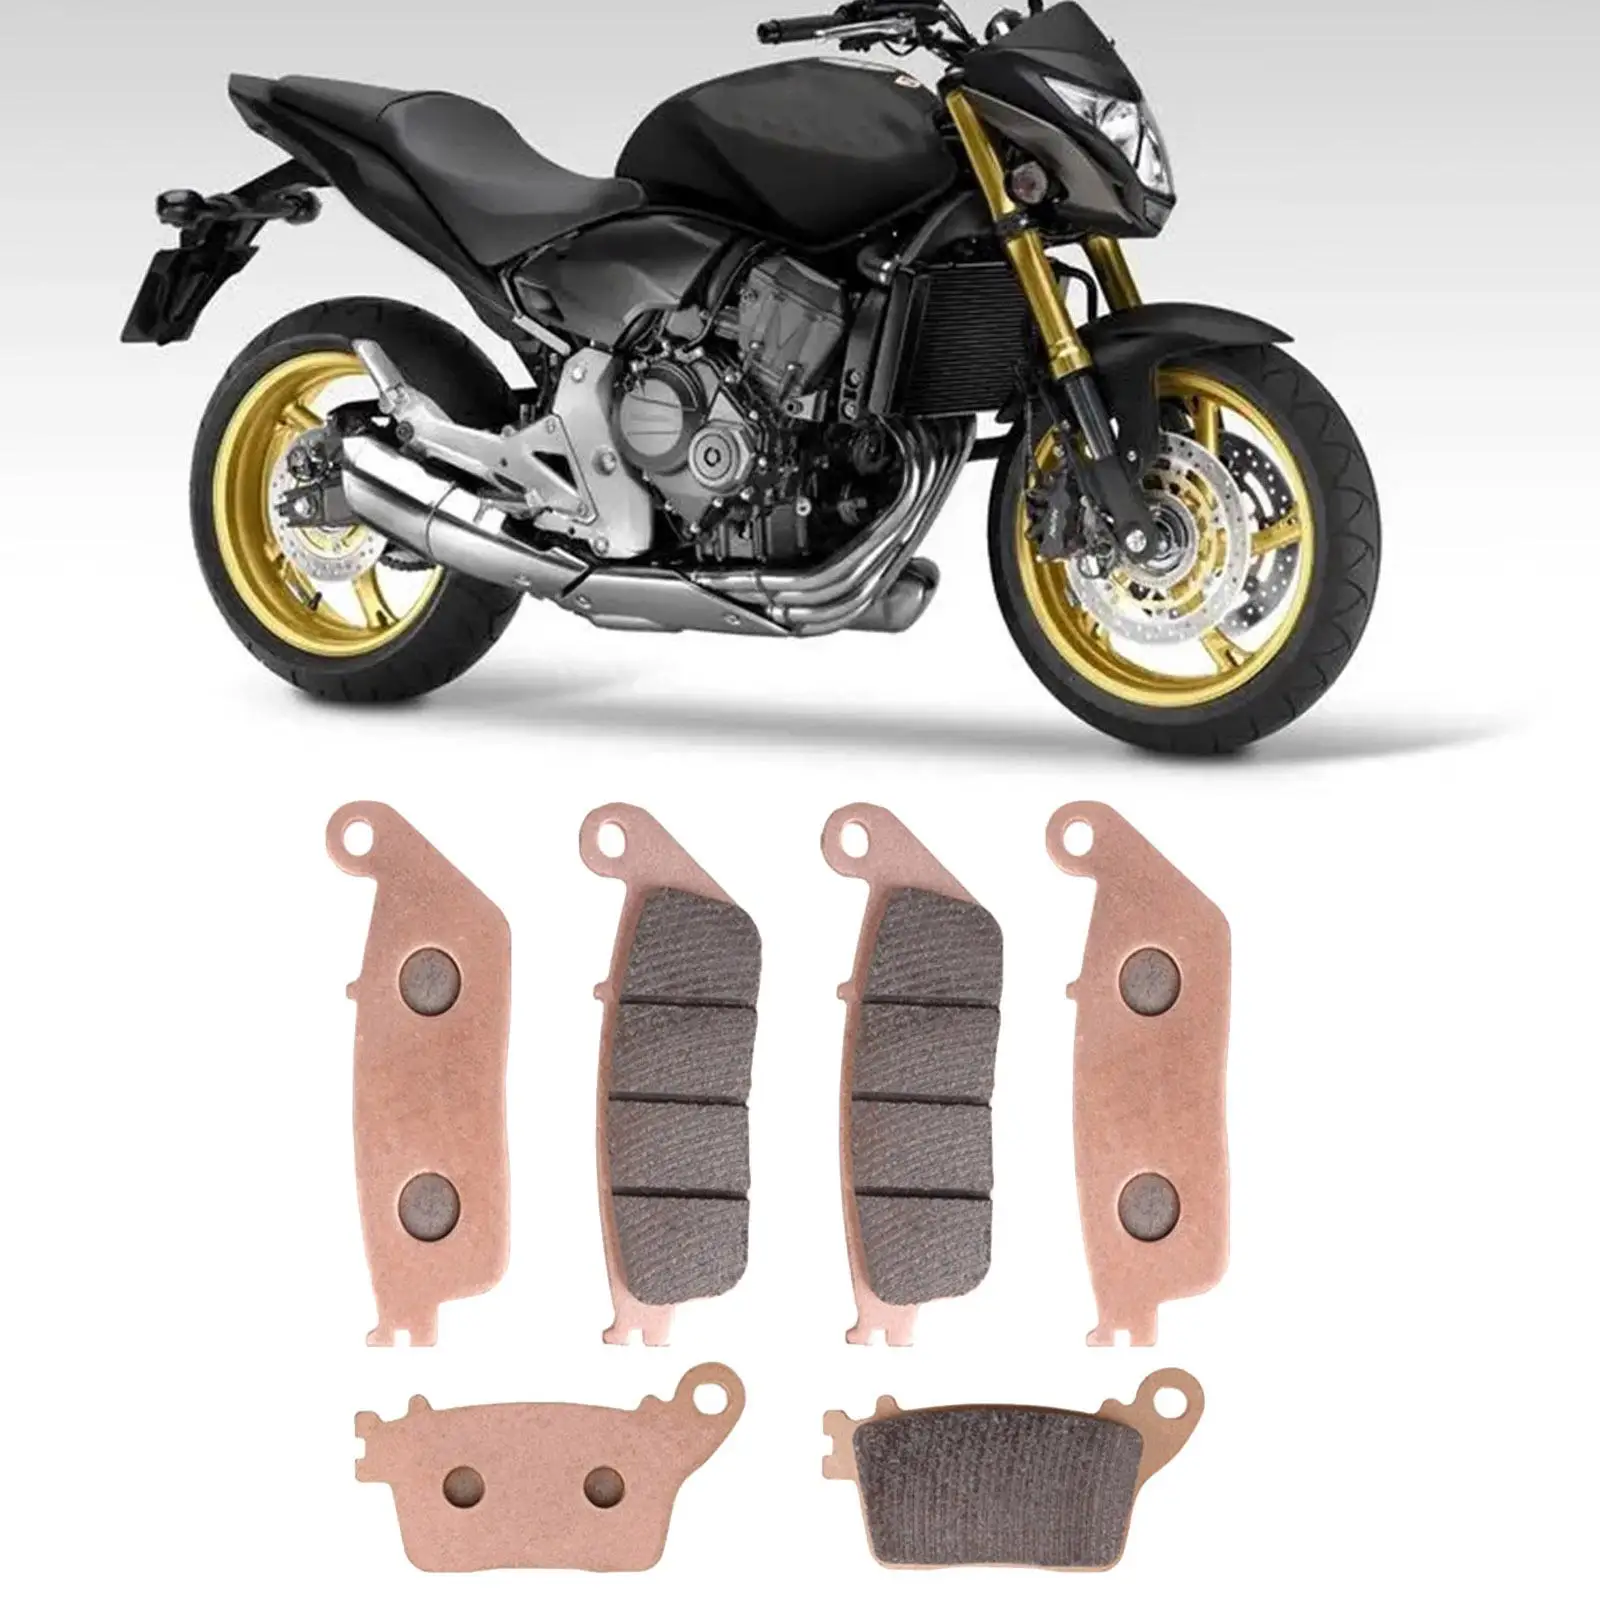 6Pcs Front and Rear Brake Pads Set Motorcycle Replacement Part for Honda Hornet Quality Professional Repair Part